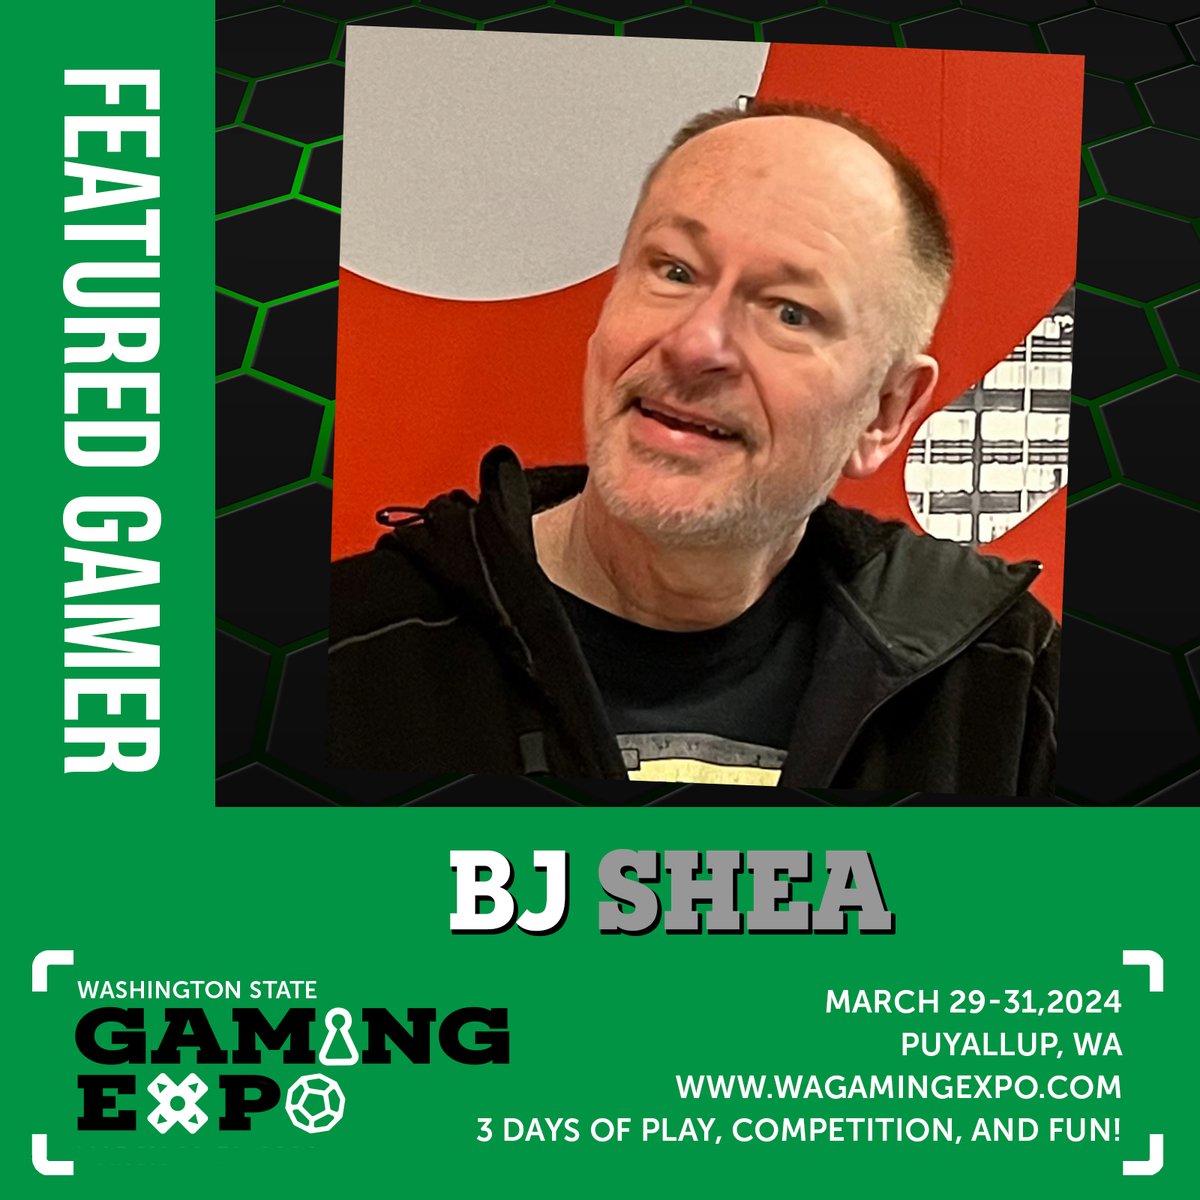 KZOK radio host and gaming enthusiast, BJ Shea, will be playing board games with attendees this weekend at the Washington State Gaming Expo! Join BJ, the charismatic radio DJ, as he brings his infectious energy to the tabletop on Saturday from 1 pm-3 pm!